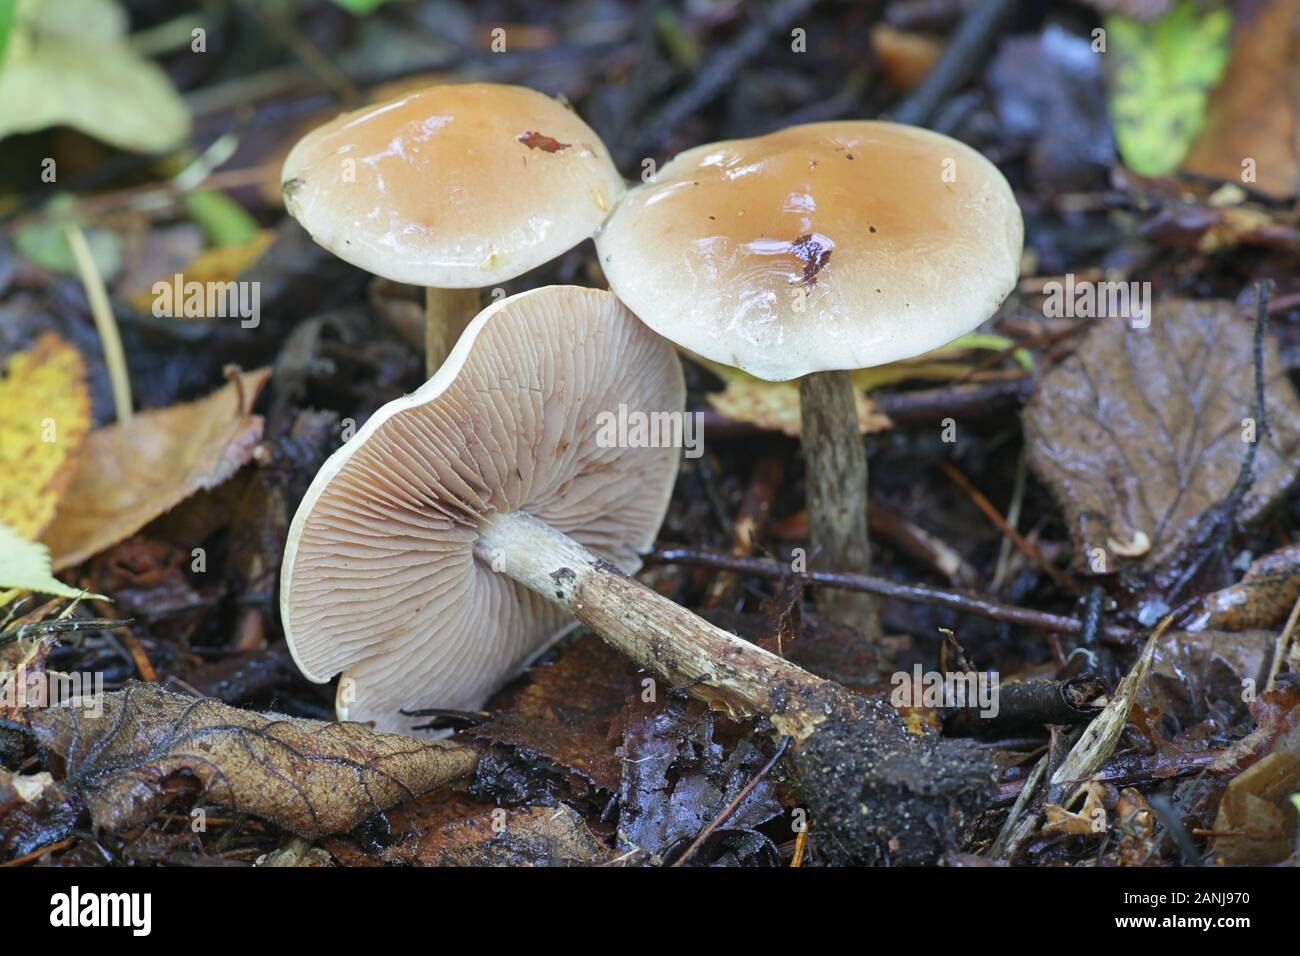 Hebeloma crustuliniforme, known as poison pie or fairy cakes, poisonous mushrooms from Finland Stock Photo